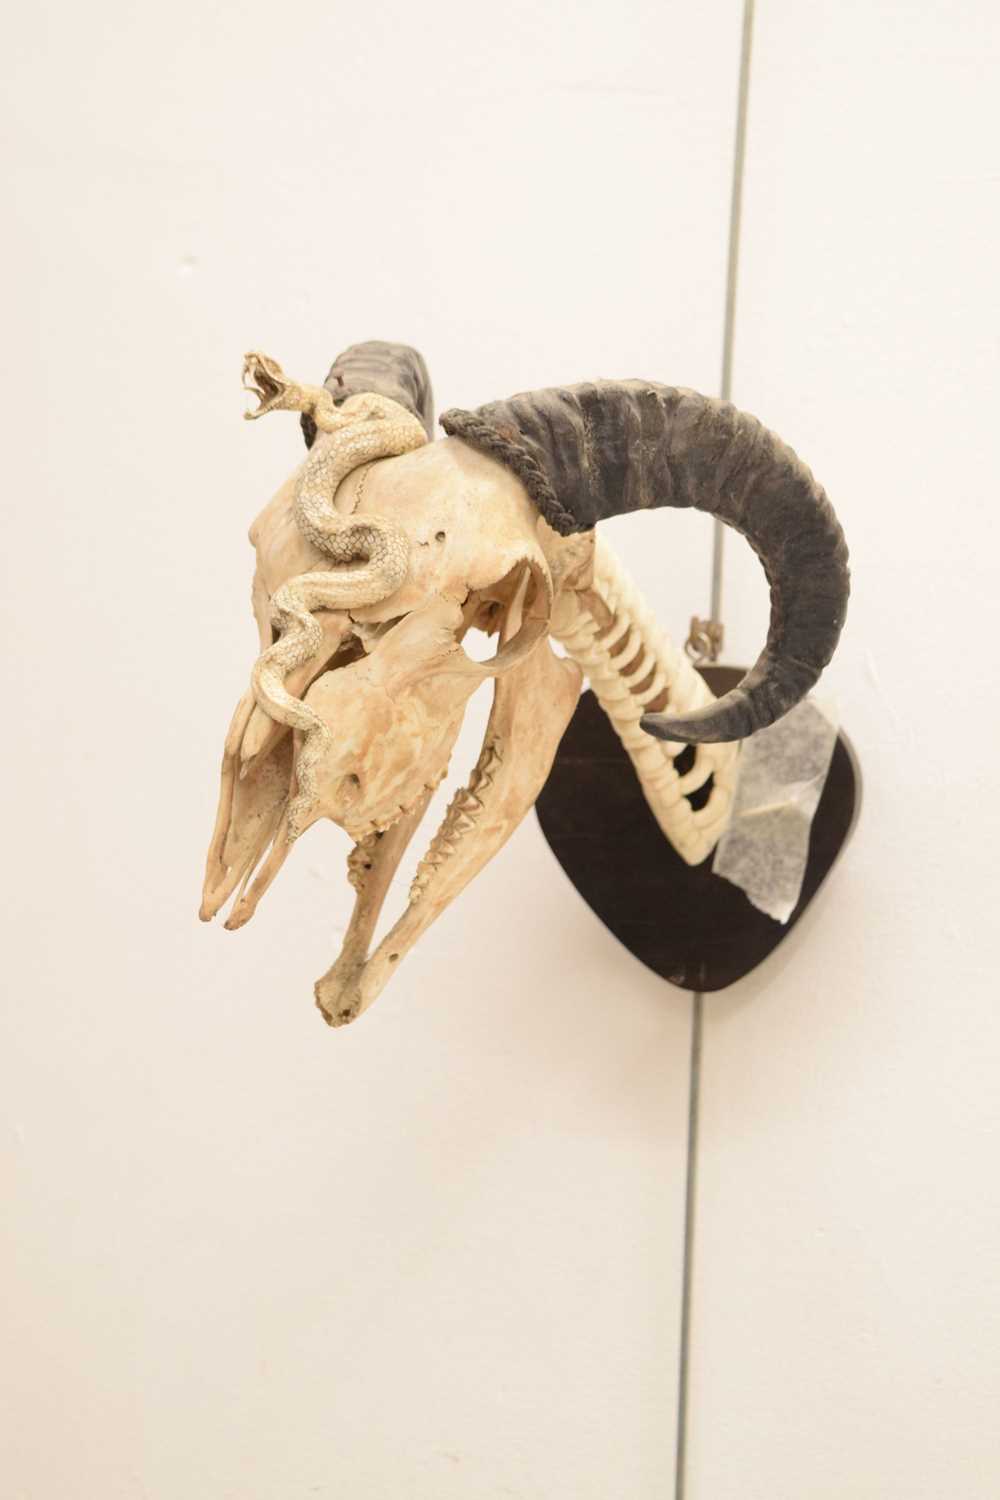 Mounted ram's head skull with snake - Image 3 of 11